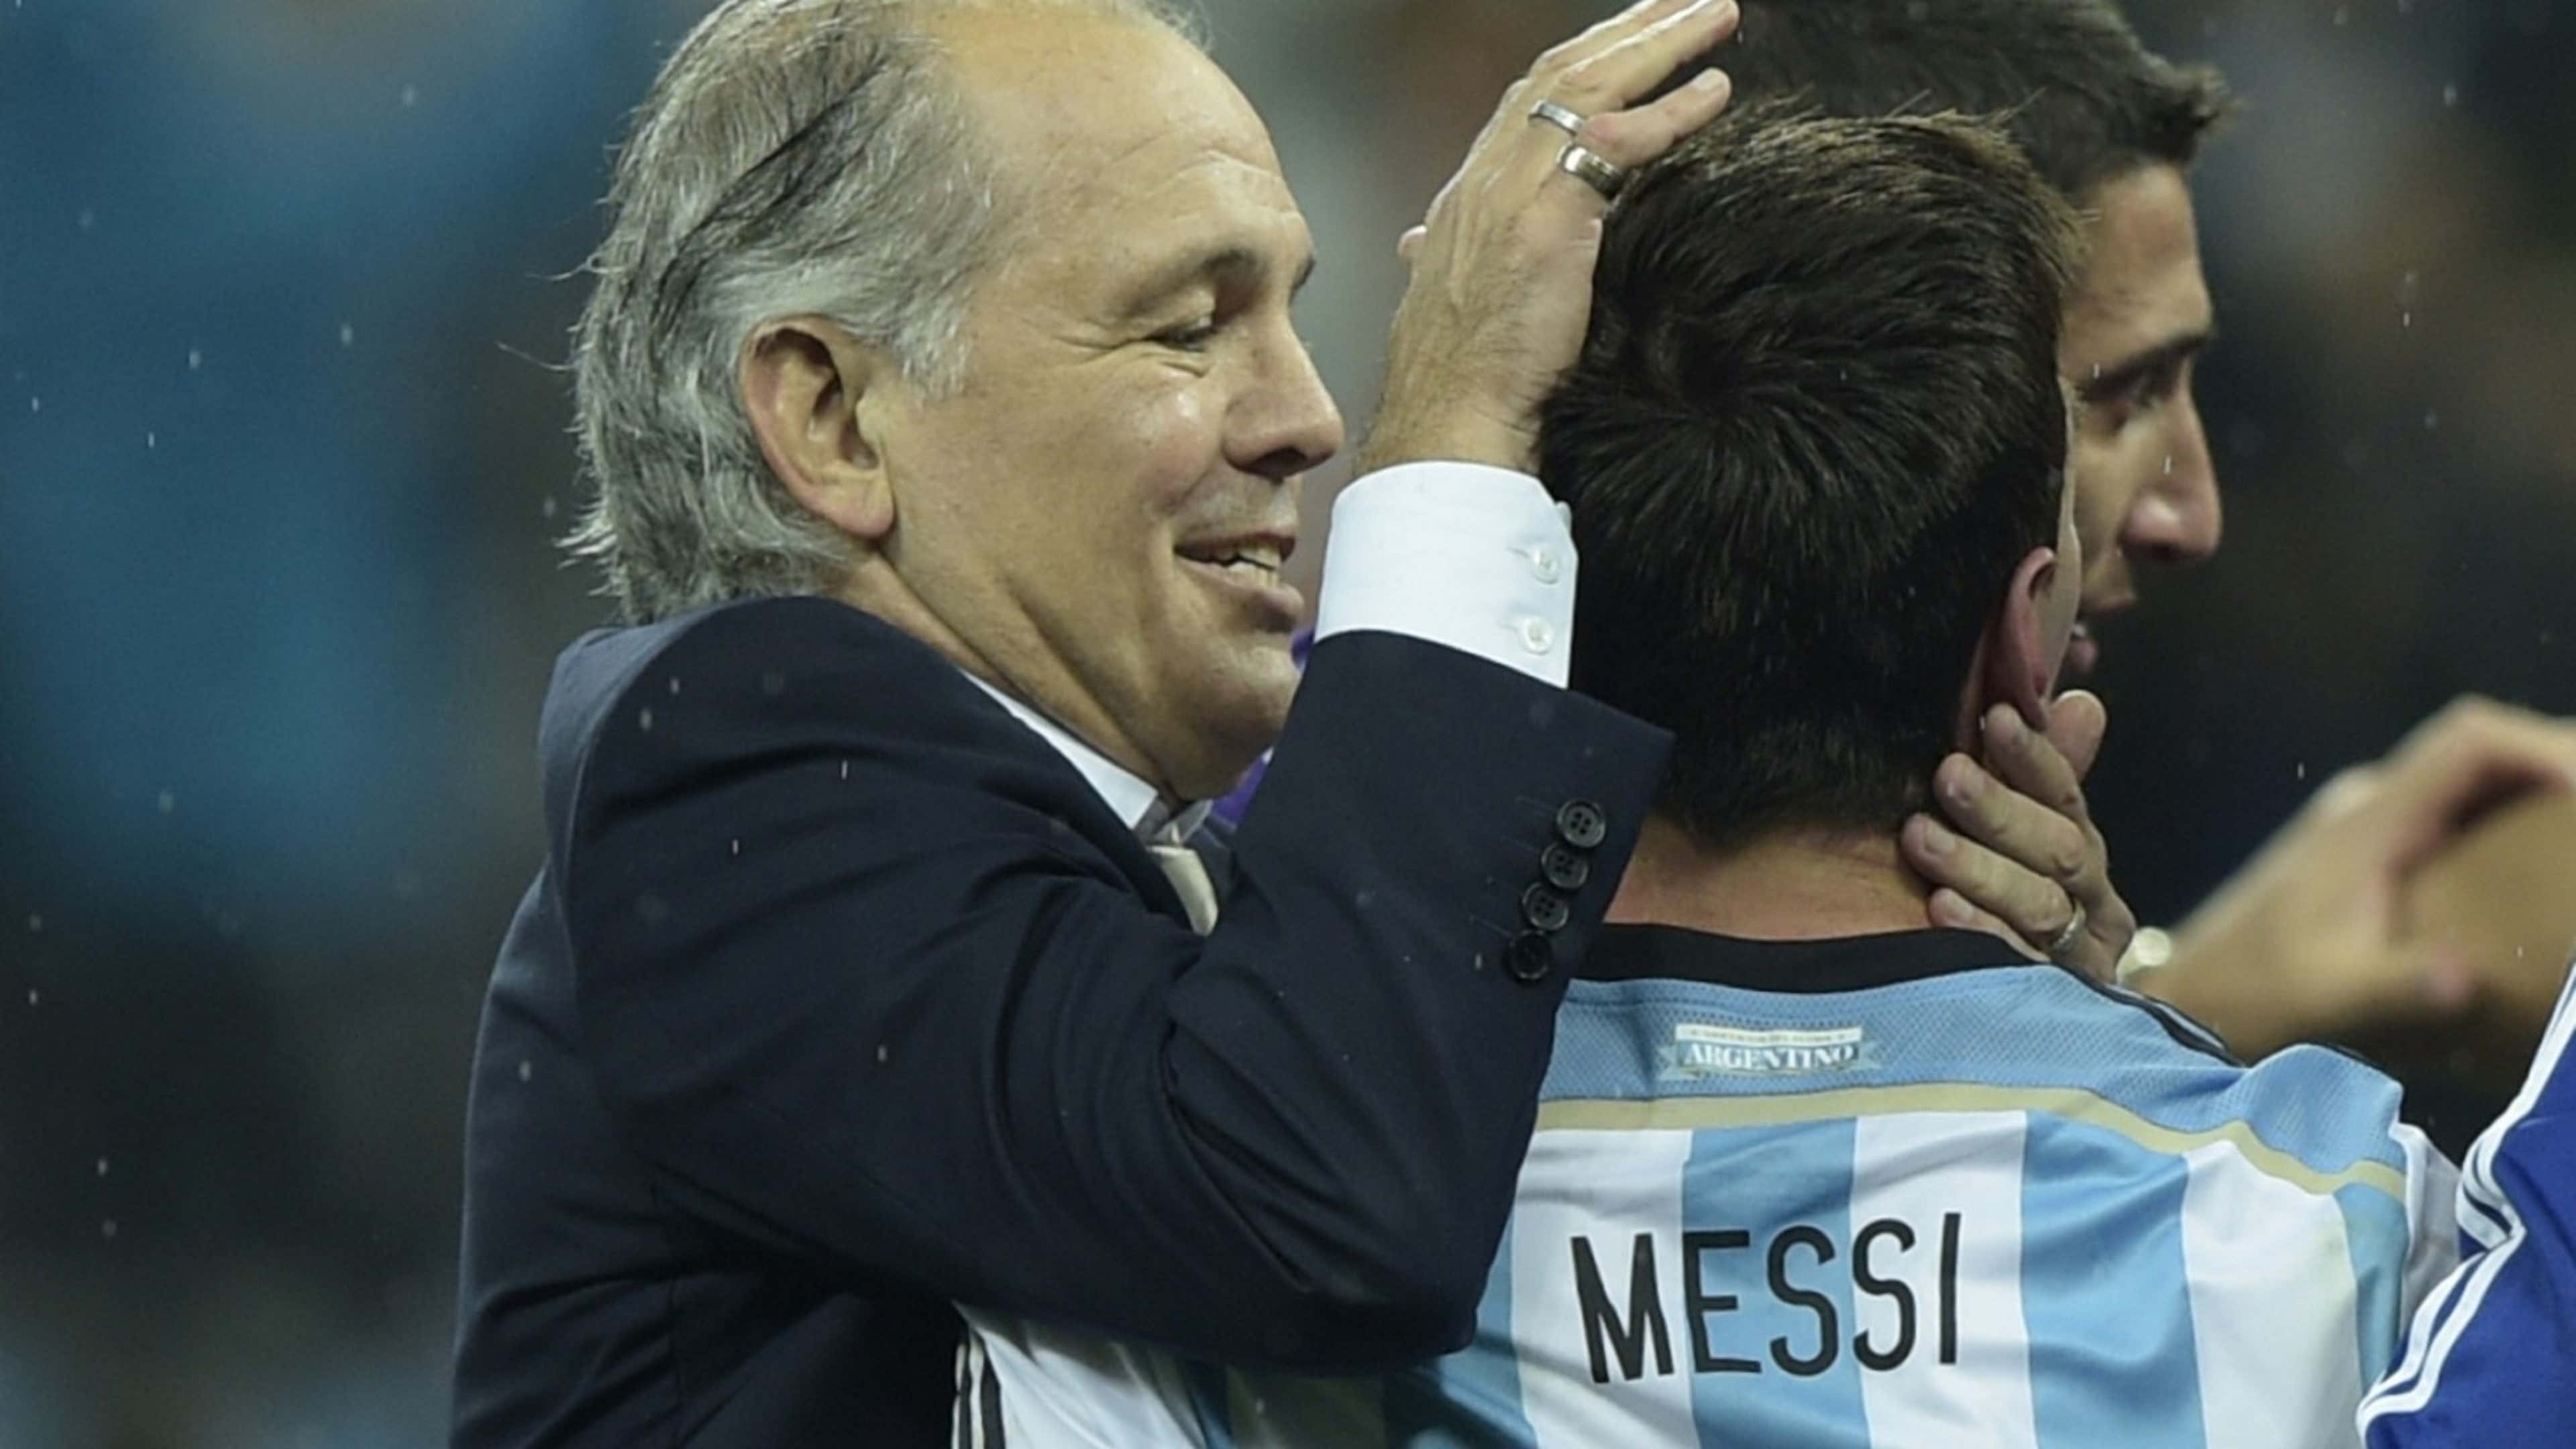 It was a pleasure to share so much with you' - Messi pays tribute